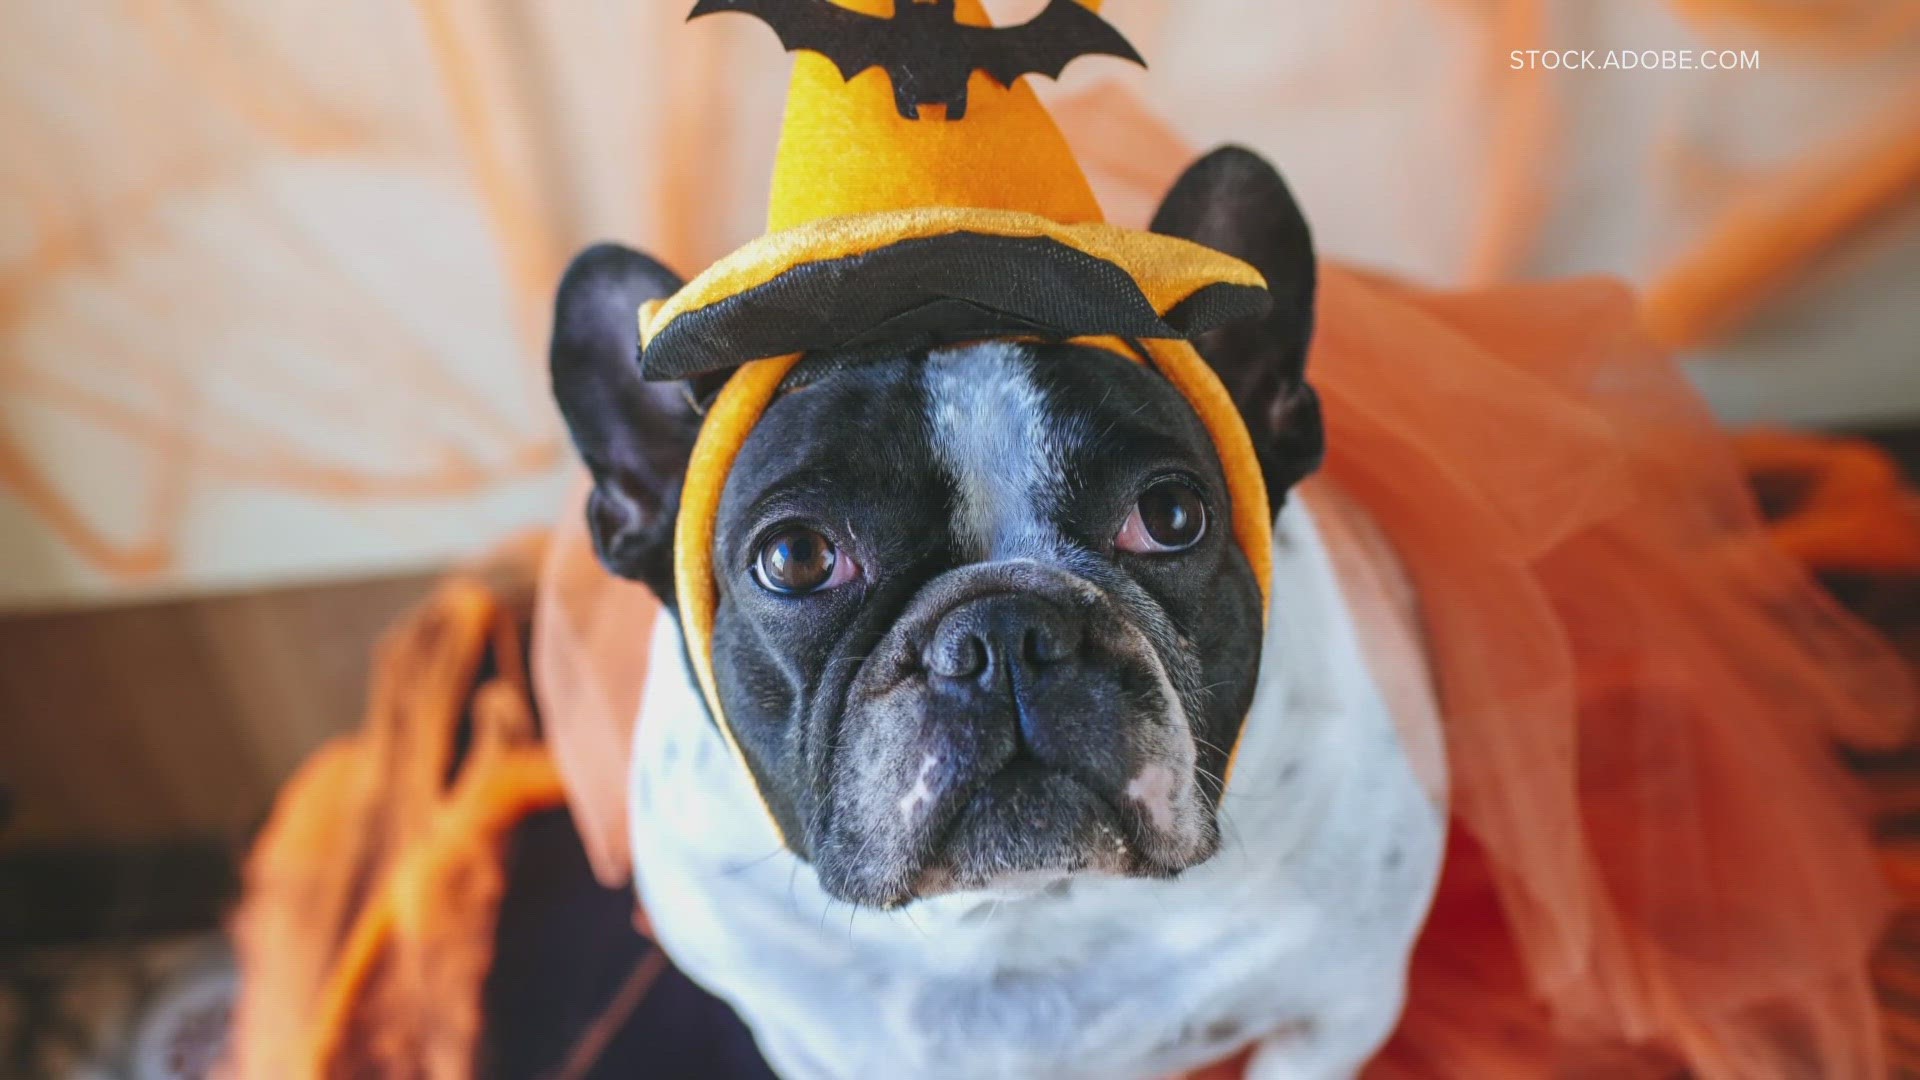 Halloween can be dangerous and stressful for your pets, but there are ways you can help.